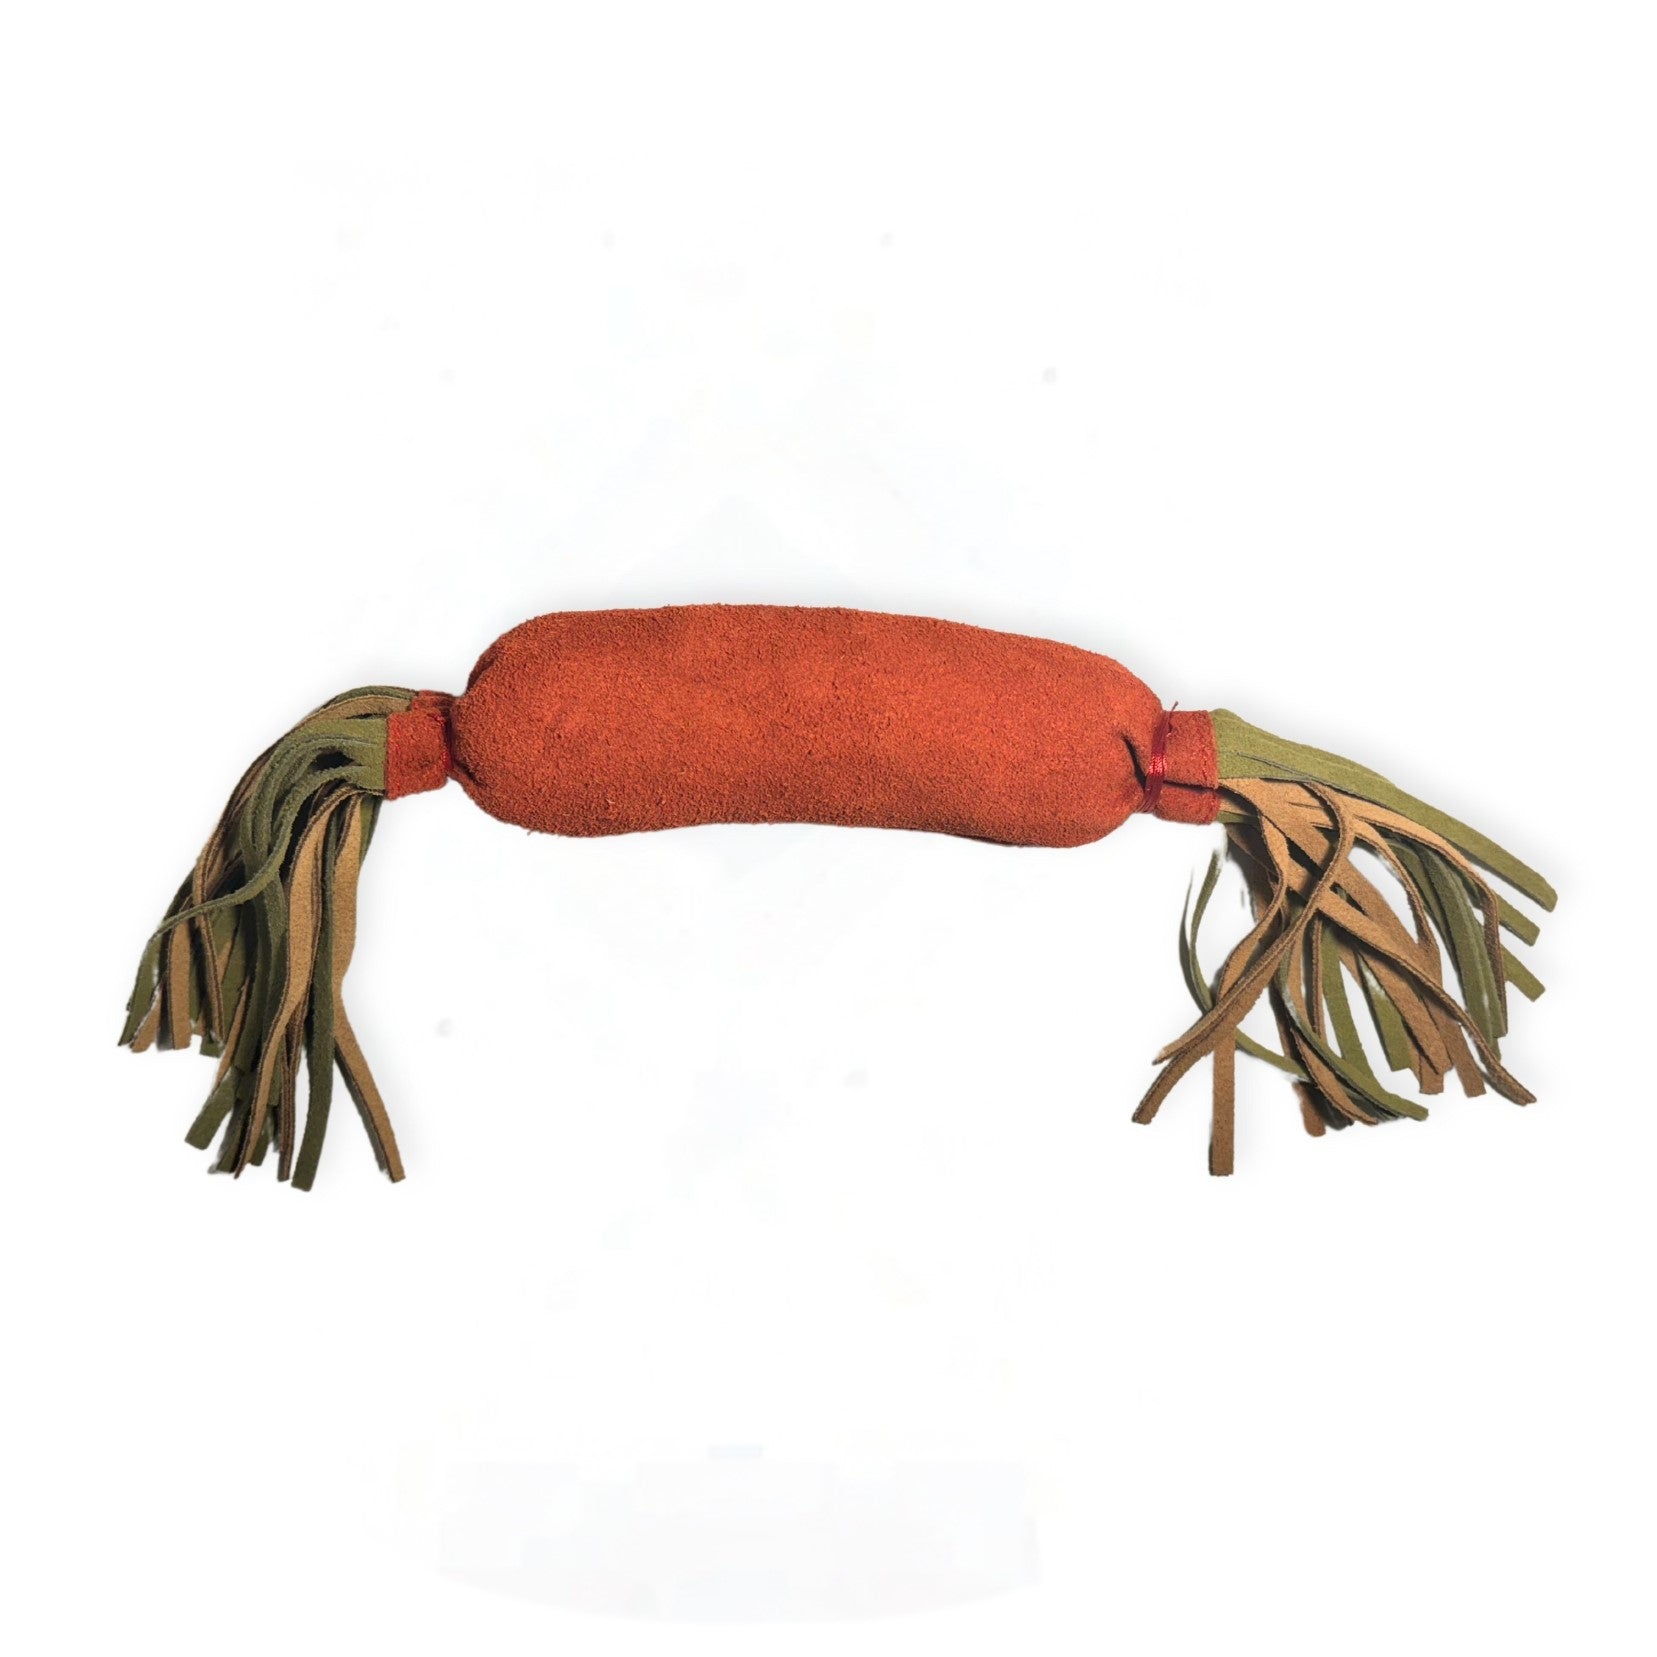 A Georgie Paws Sizzling Sausage plush dog toy shaped like a sausage with a textured buffalo suede center and dark green fringes at both ends, resembling tassels, against a white background.